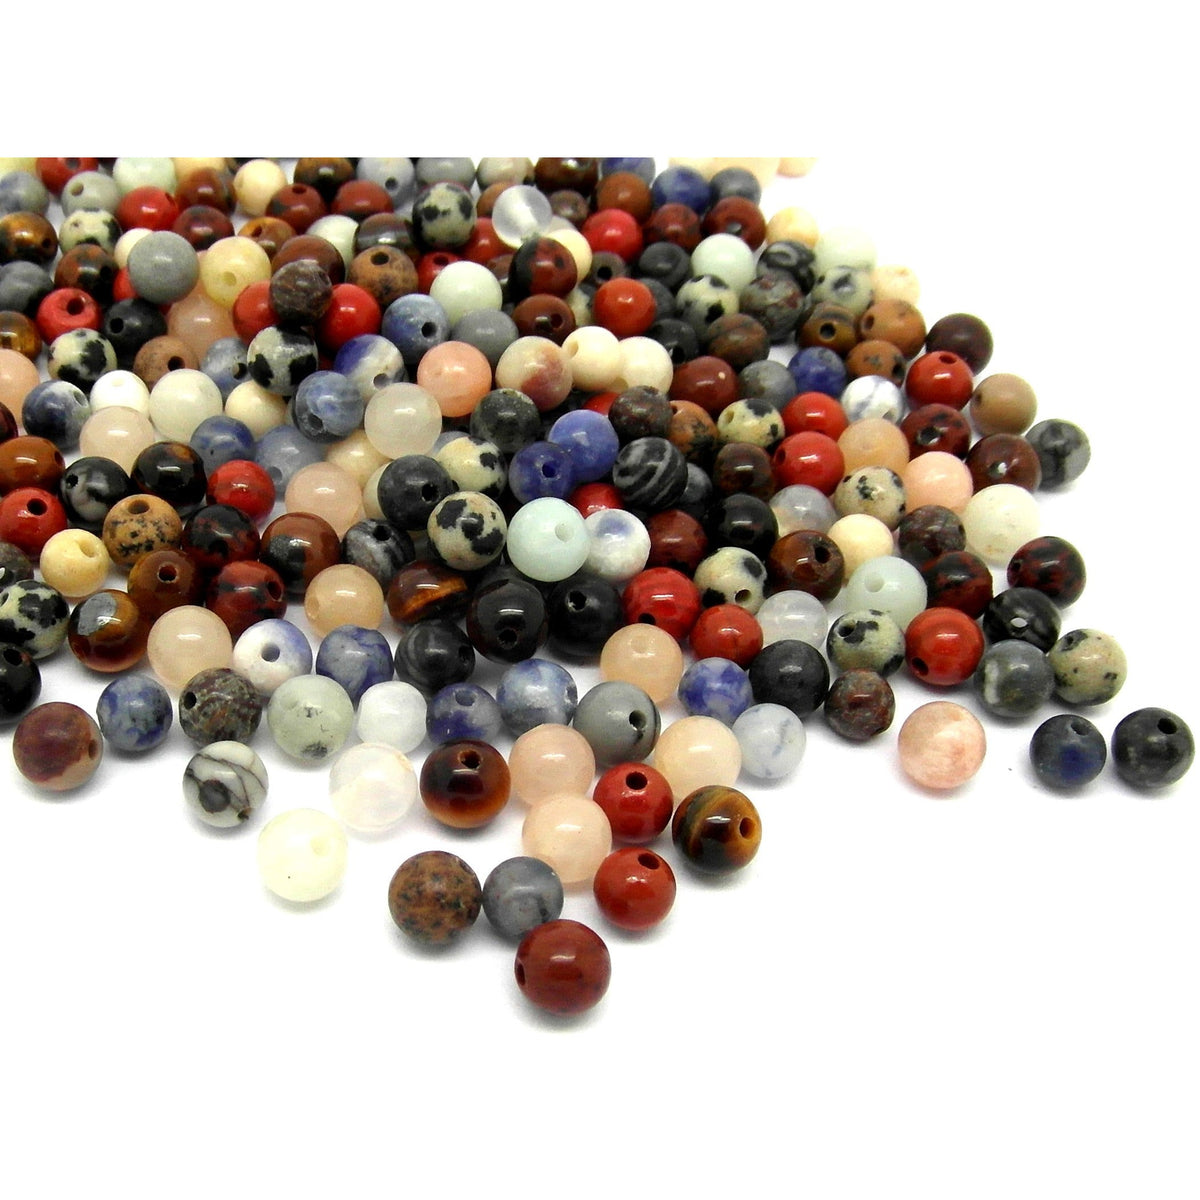 5 14mm Vintage Painted Clay Beads Round Multicolor Bird Beads Peruvian Clay  Beads to String Jewelry Making Beading Supplies 